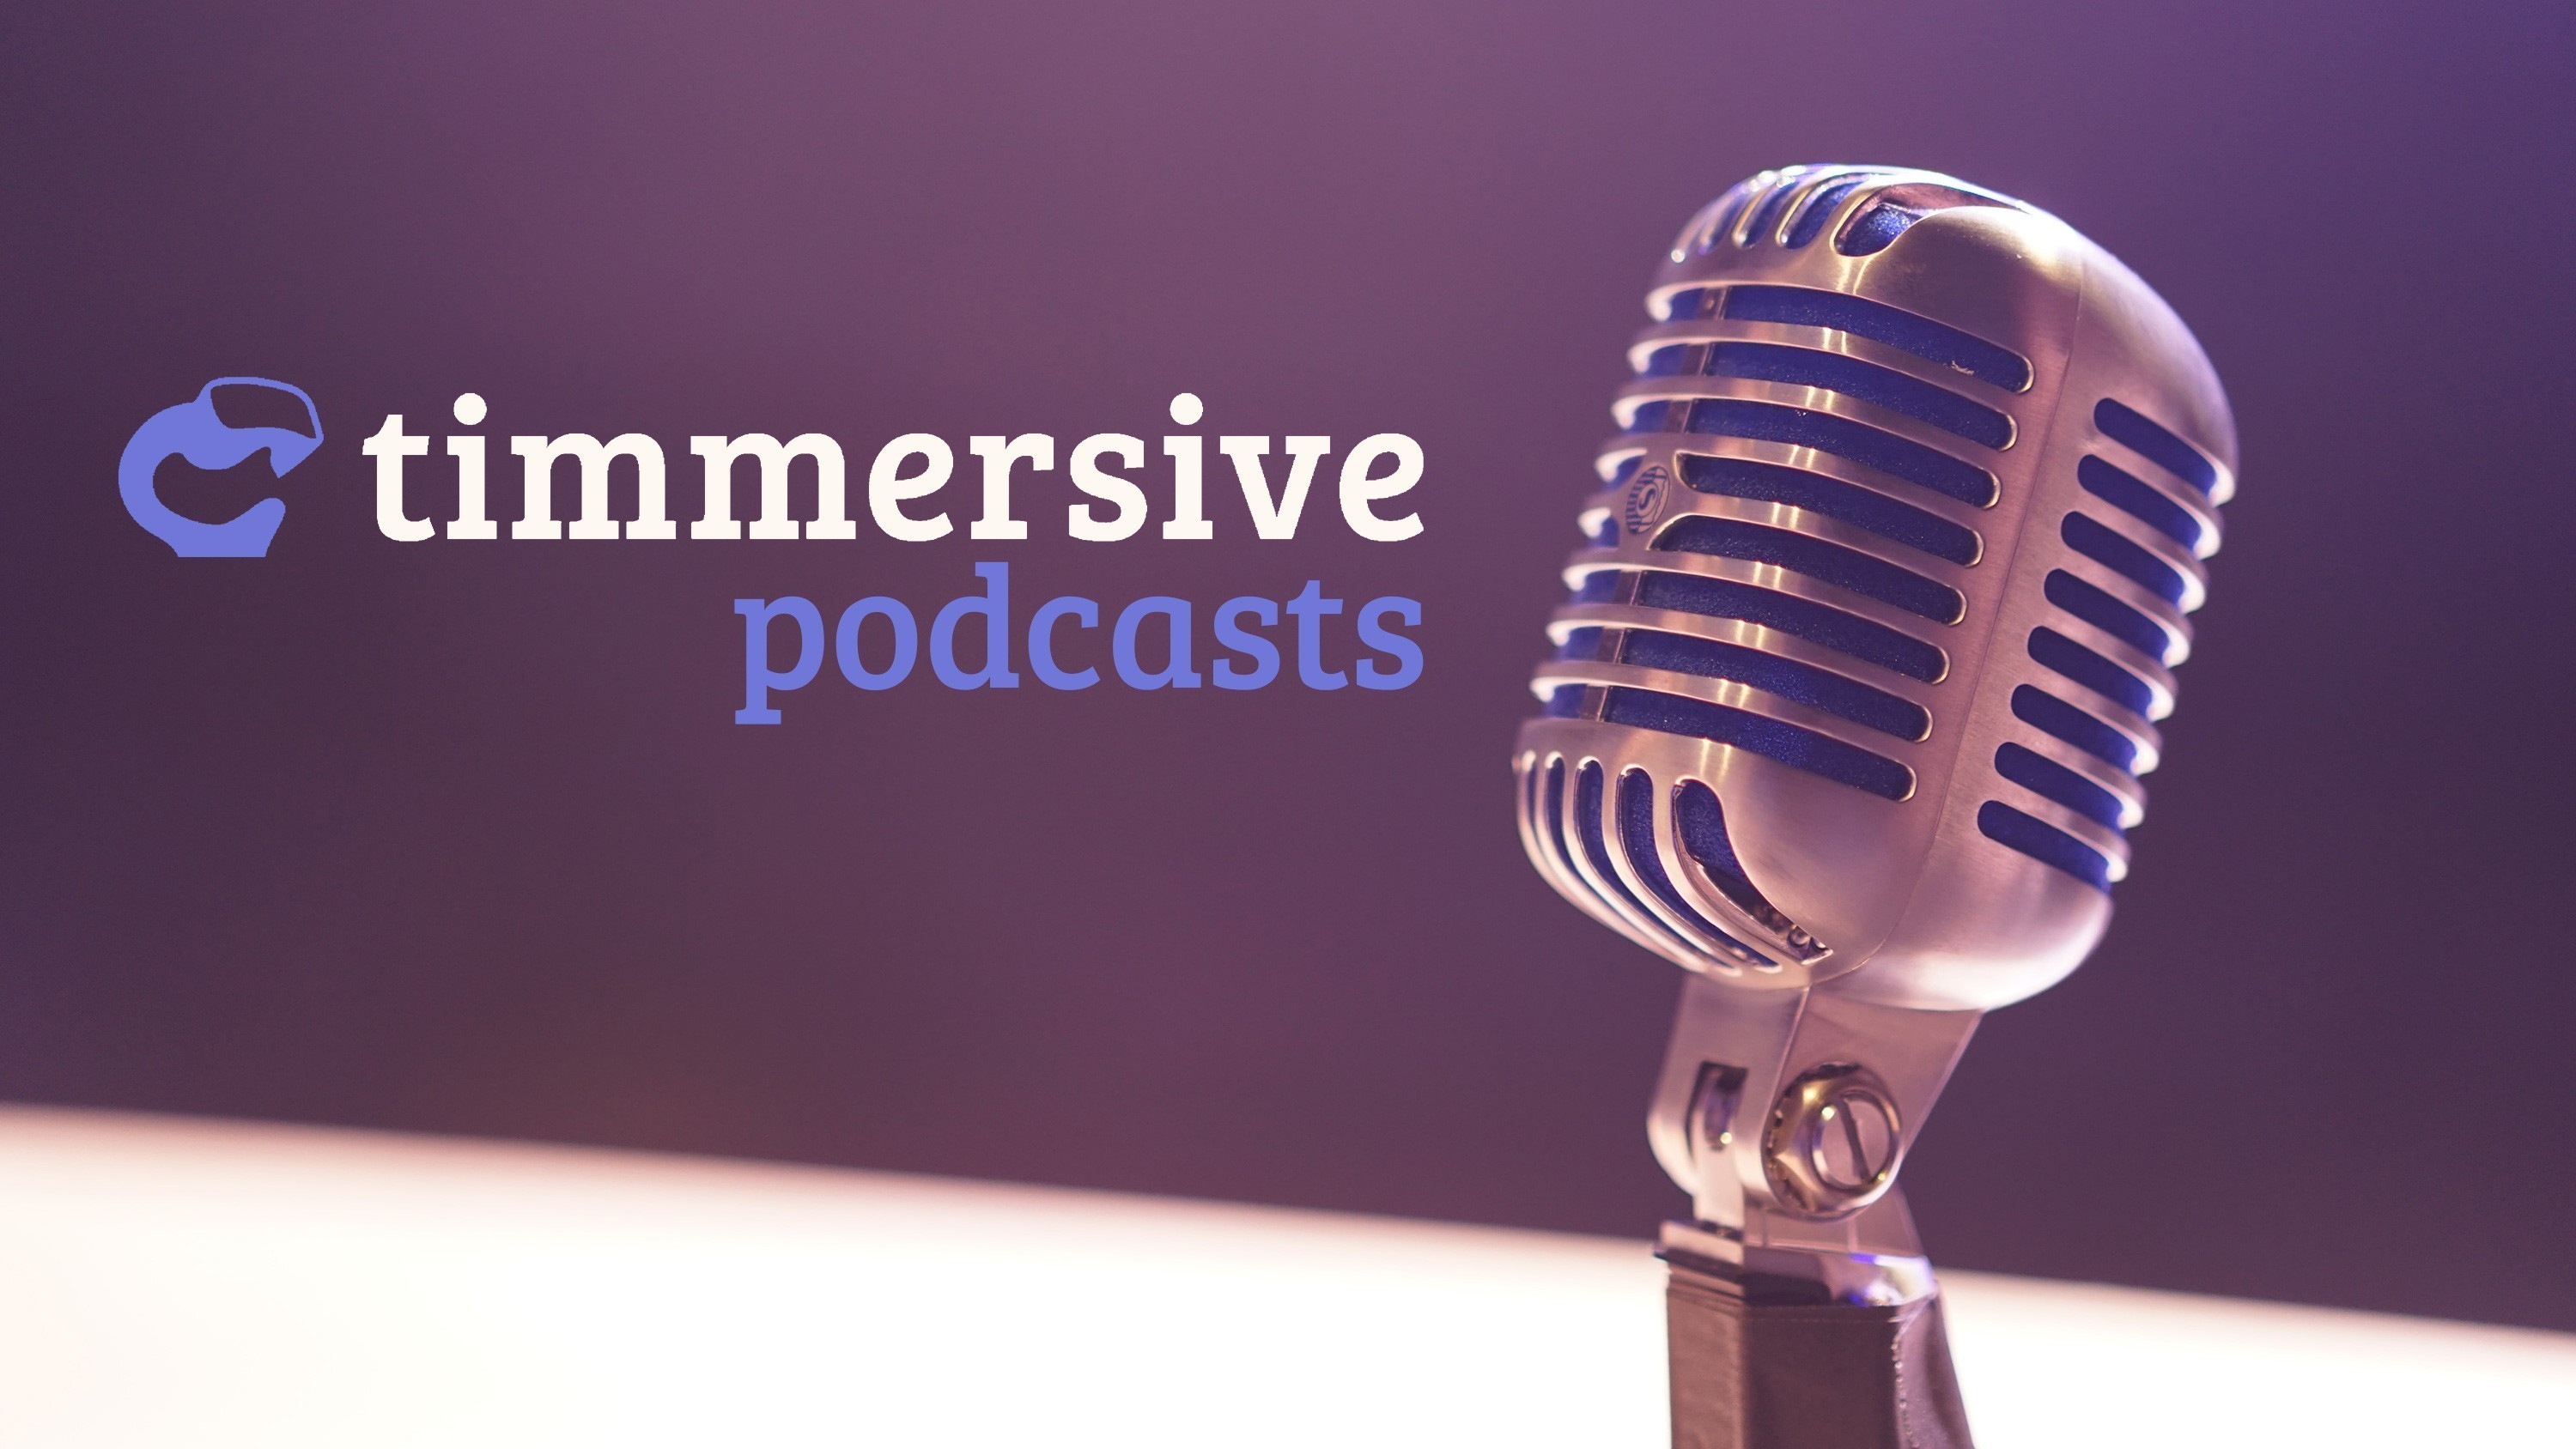 corporate podcasts by timmersive